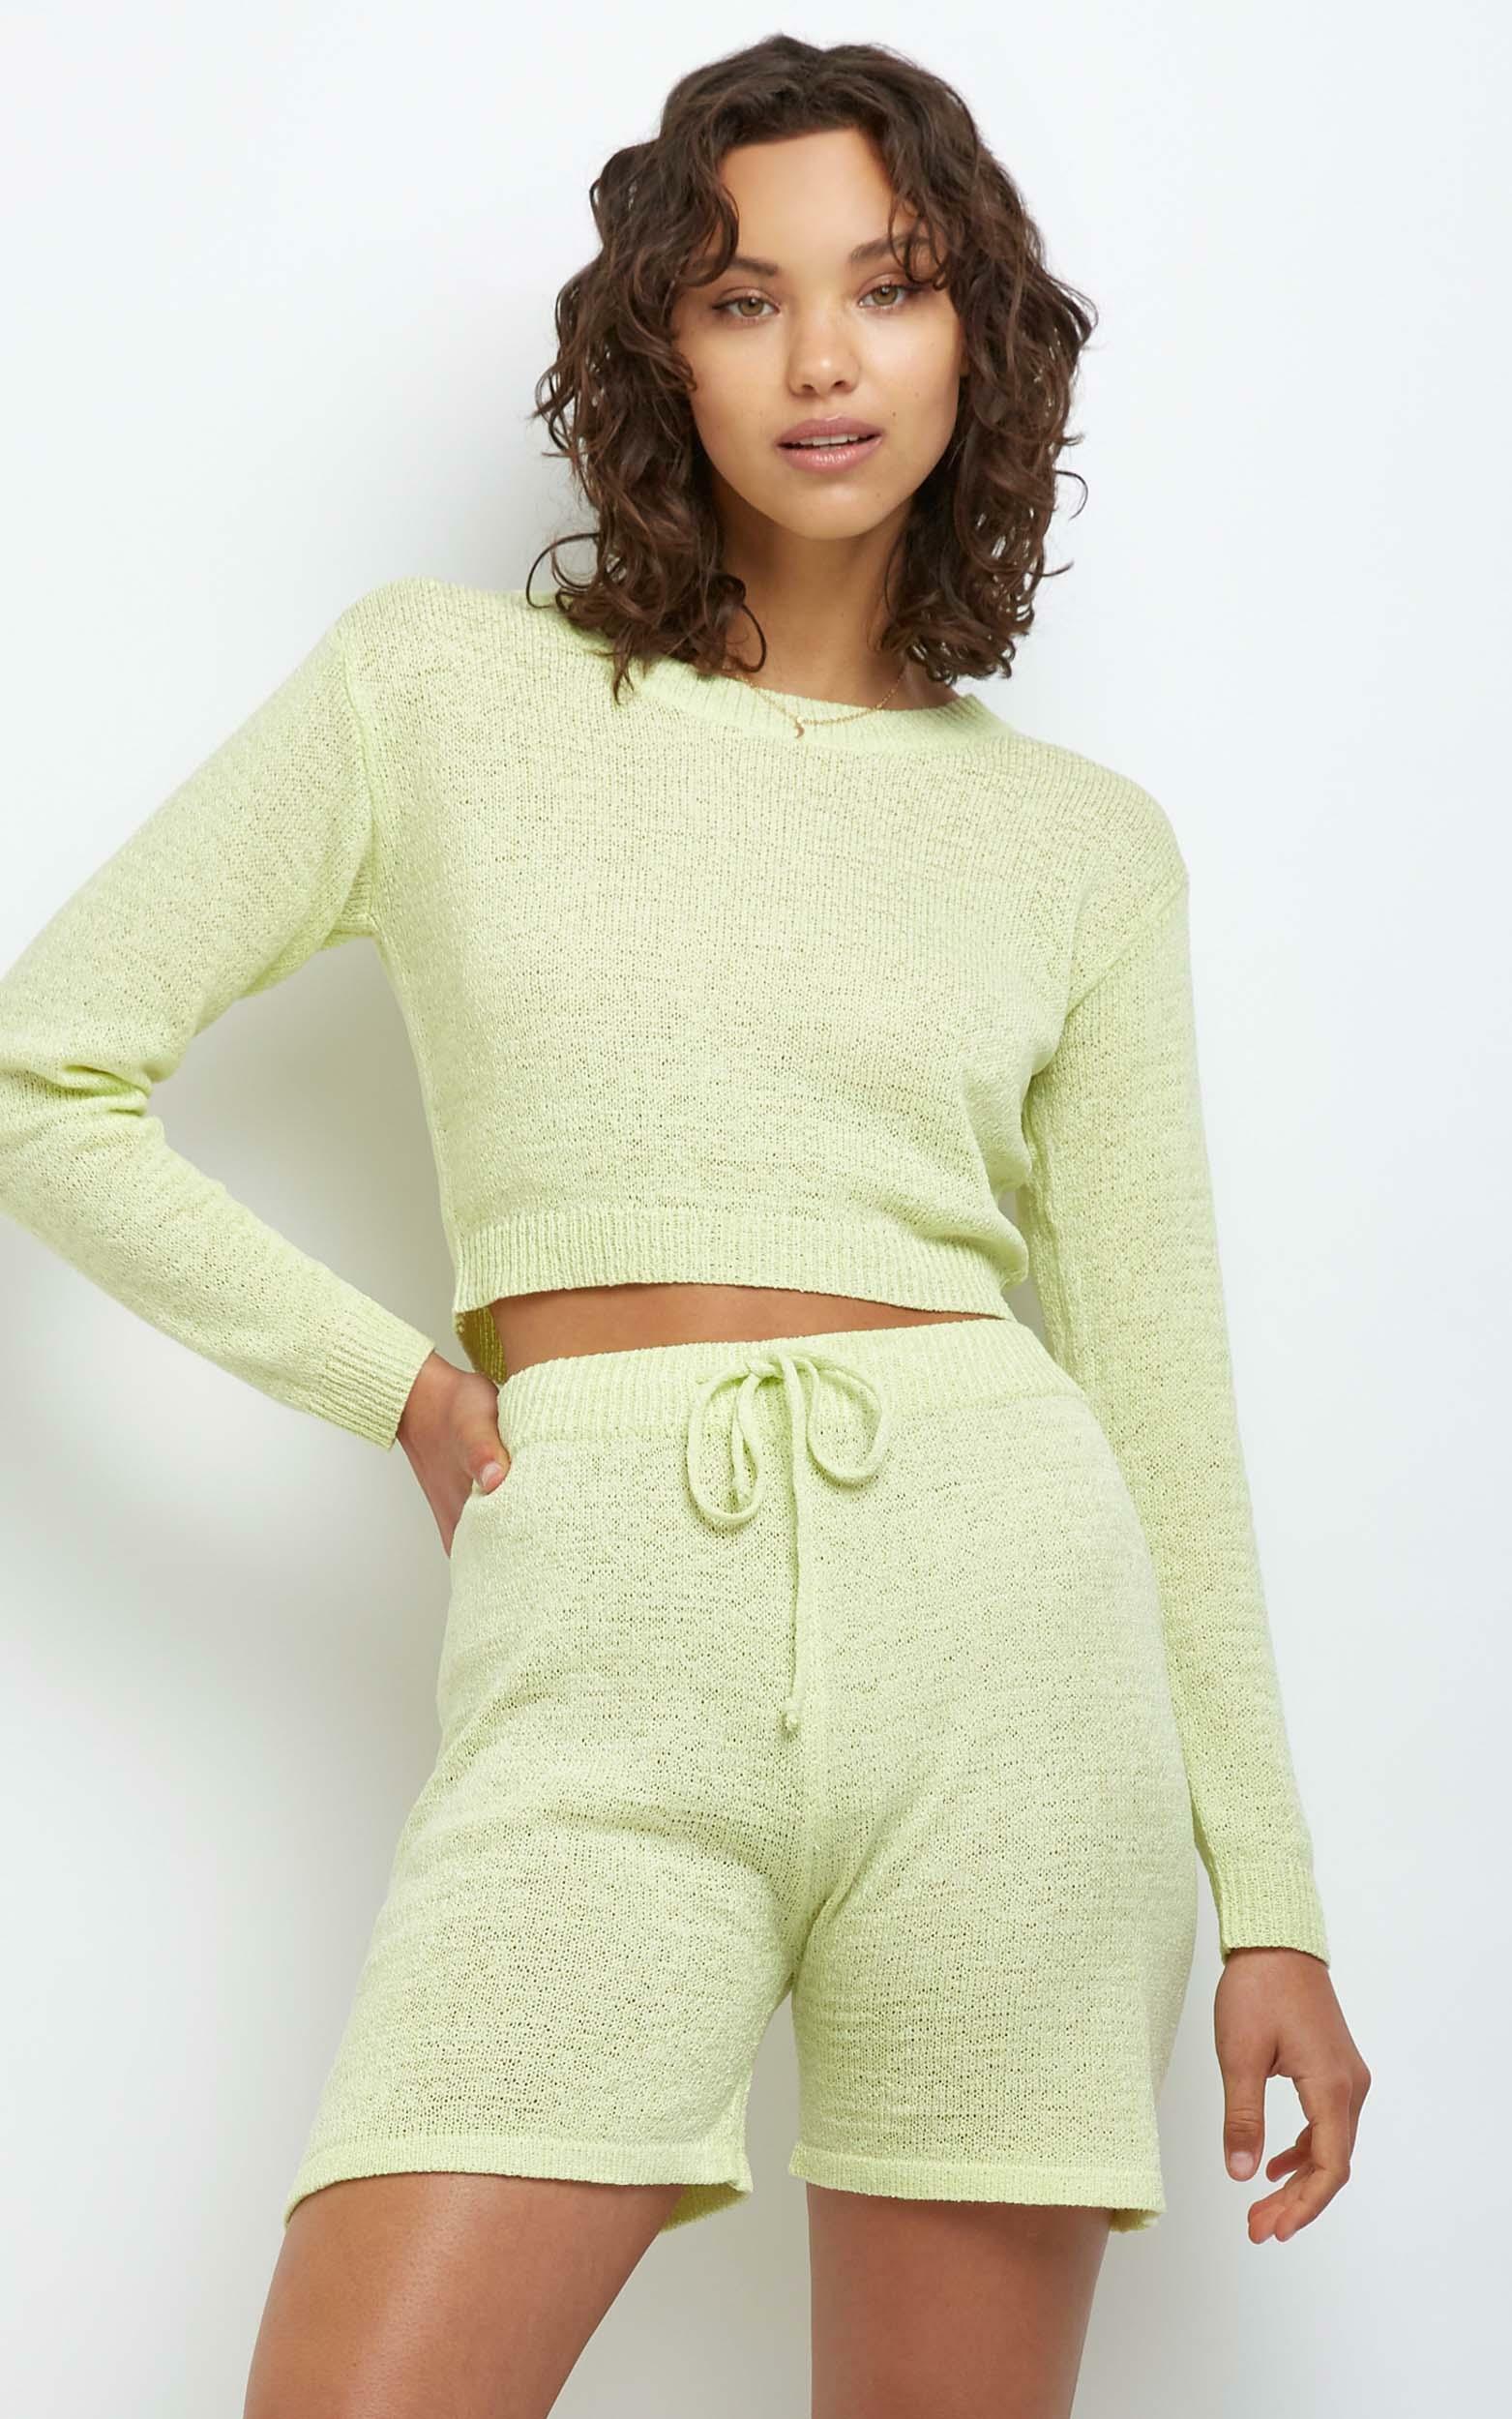 Dacia Knit Top in Yellow - L, Yellow, hi-res image number null